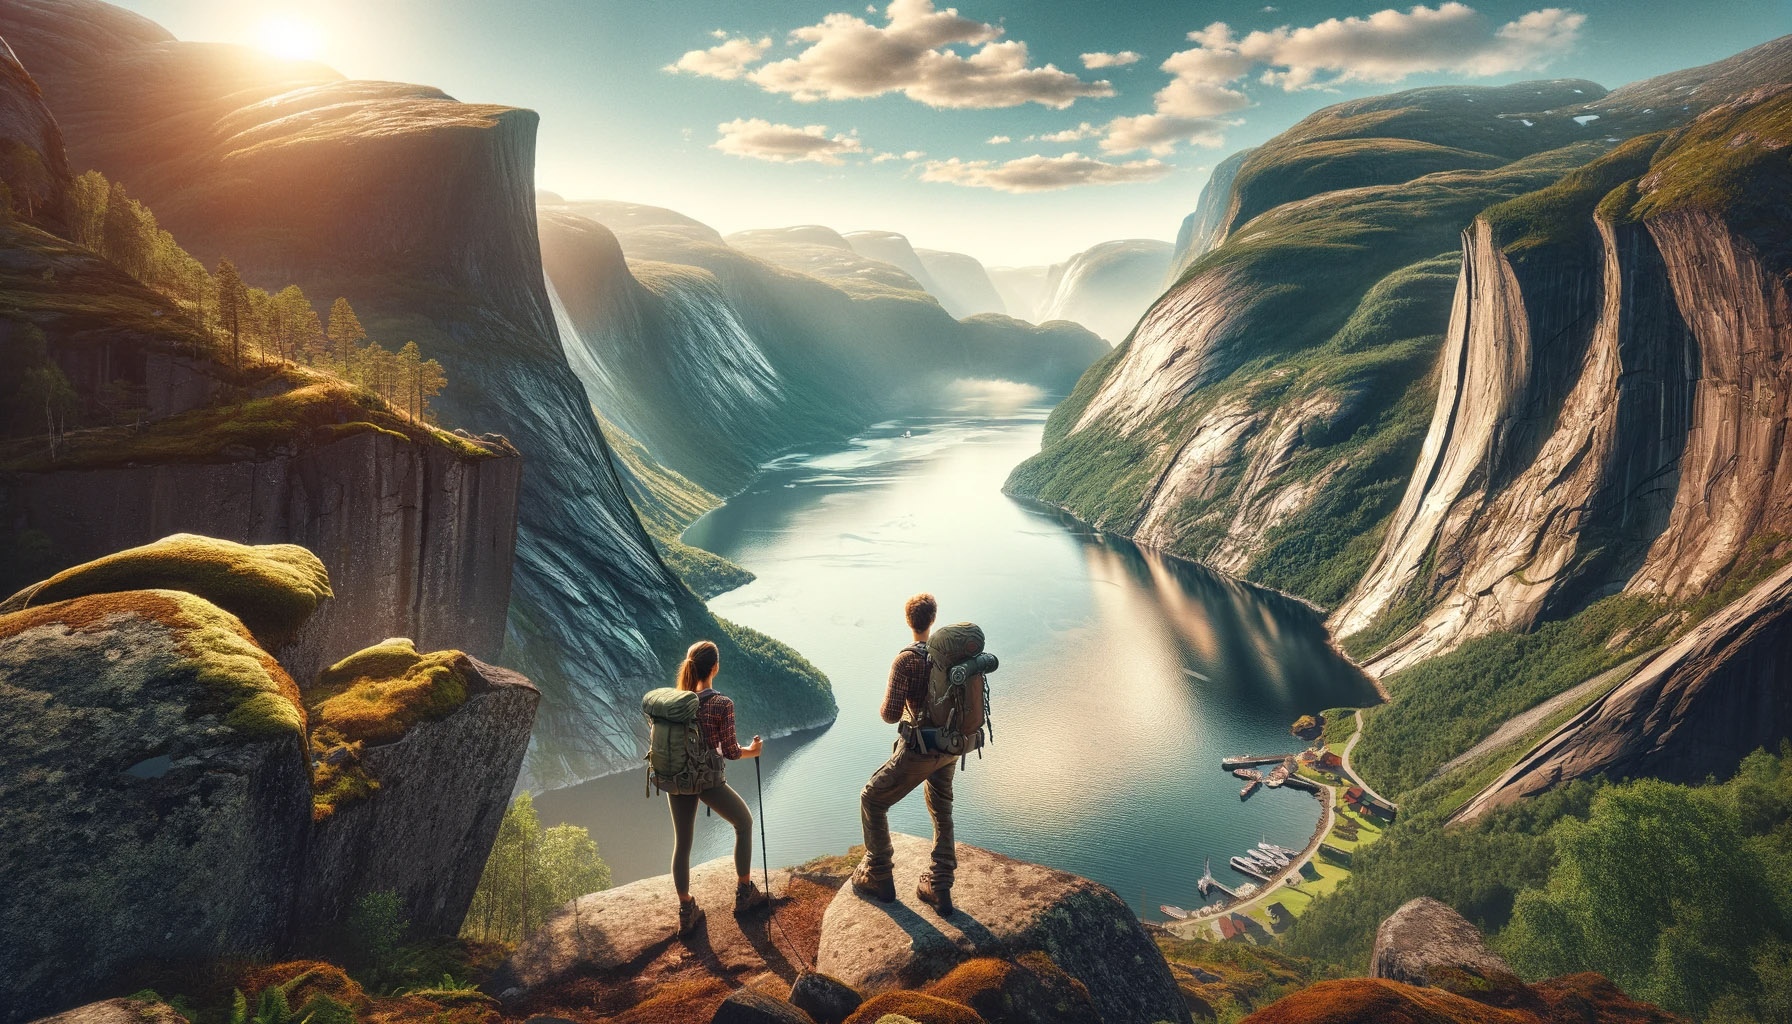 A scenic view of a Norwegian fjord with towering cliffs and lush greenery